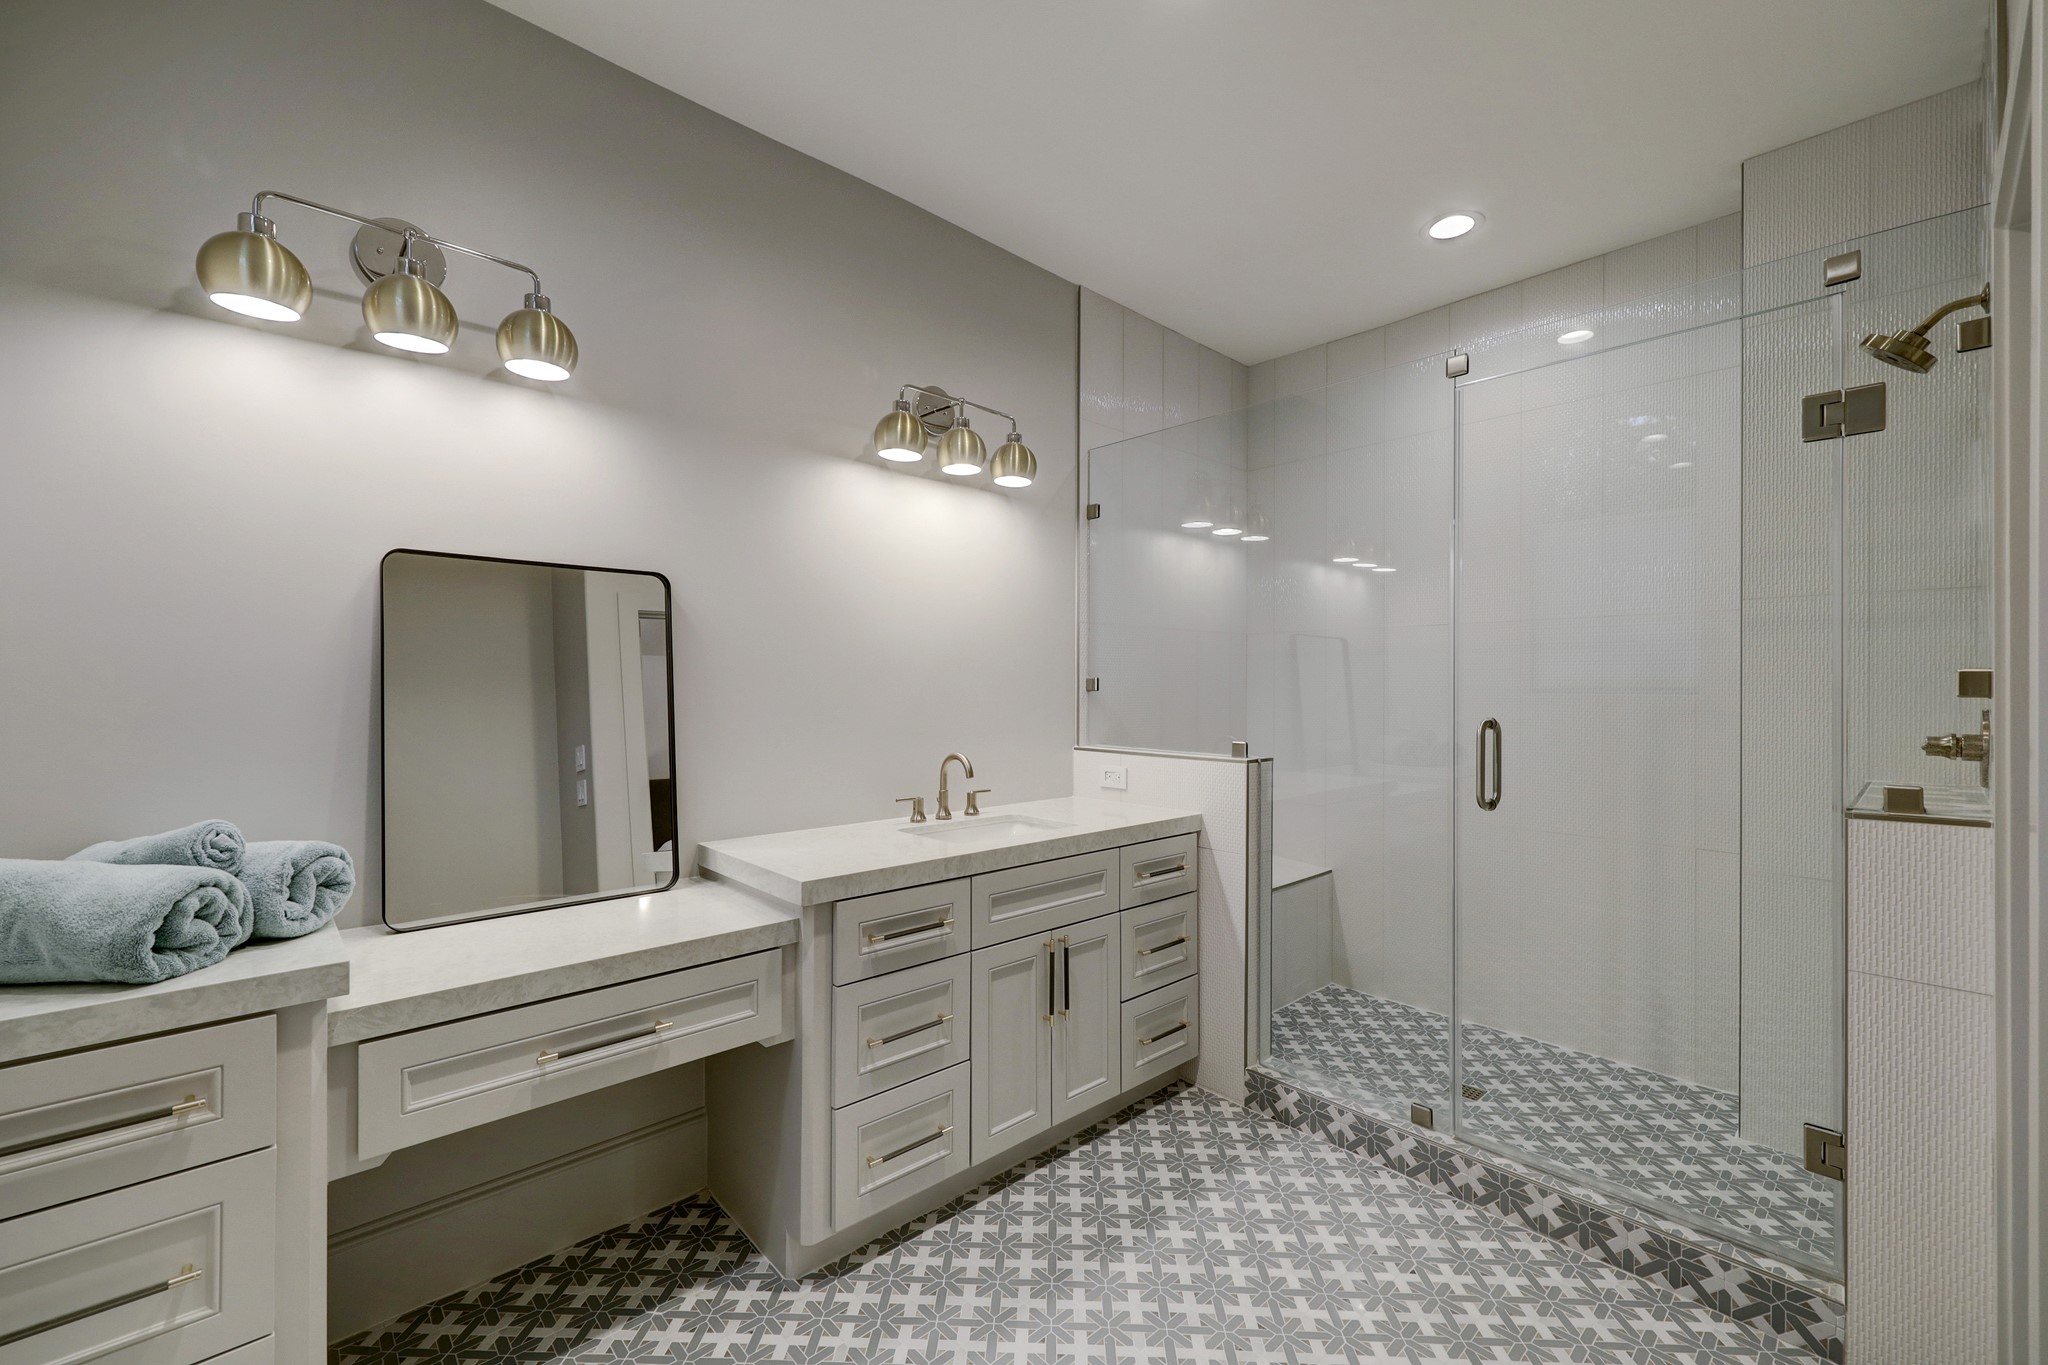 Spacious Ensuite bath with generous shower, cabinetry and counter tops. Gorgeous light fixtures and hardware.